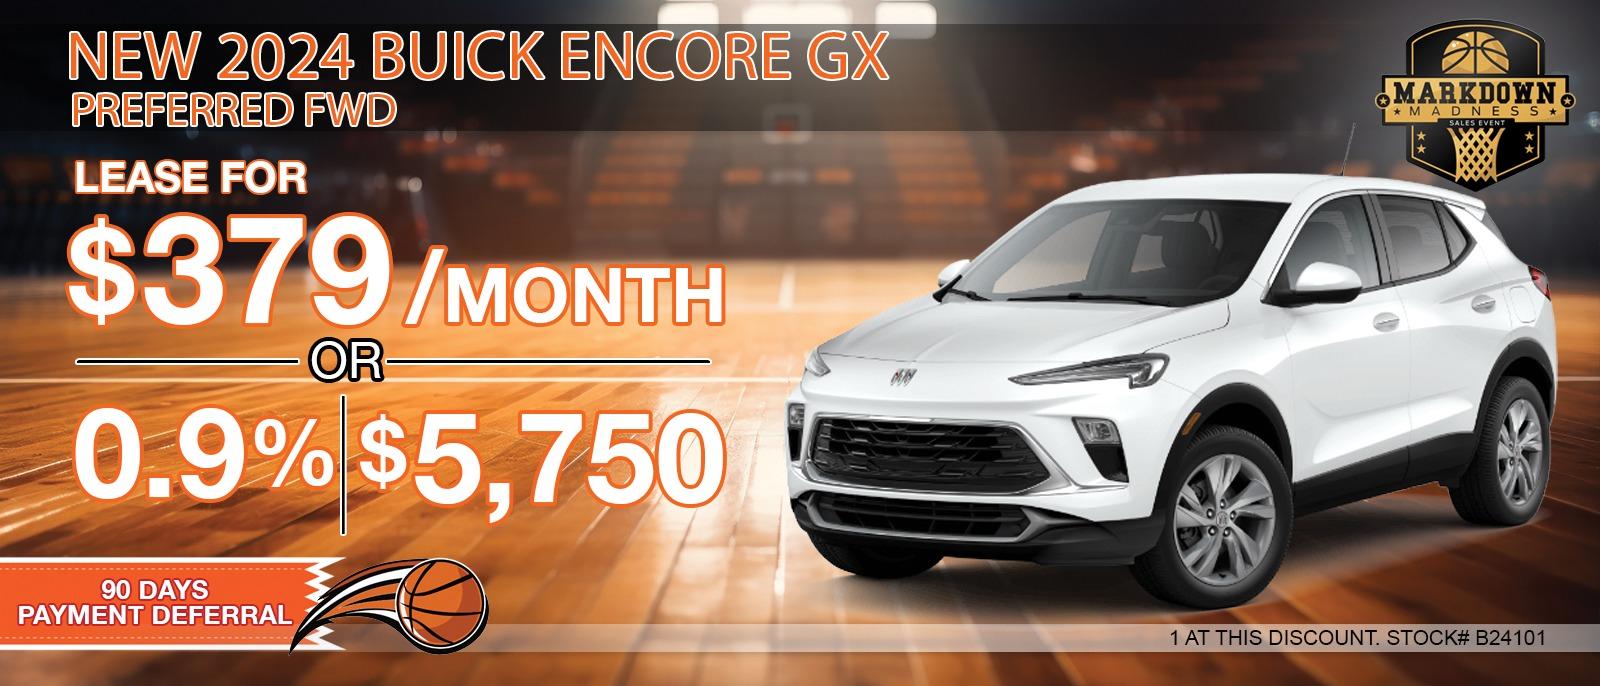 2024 BUICK ENCORE GX AVENIR SAVE UP TO $5,750 OFF MSRP.